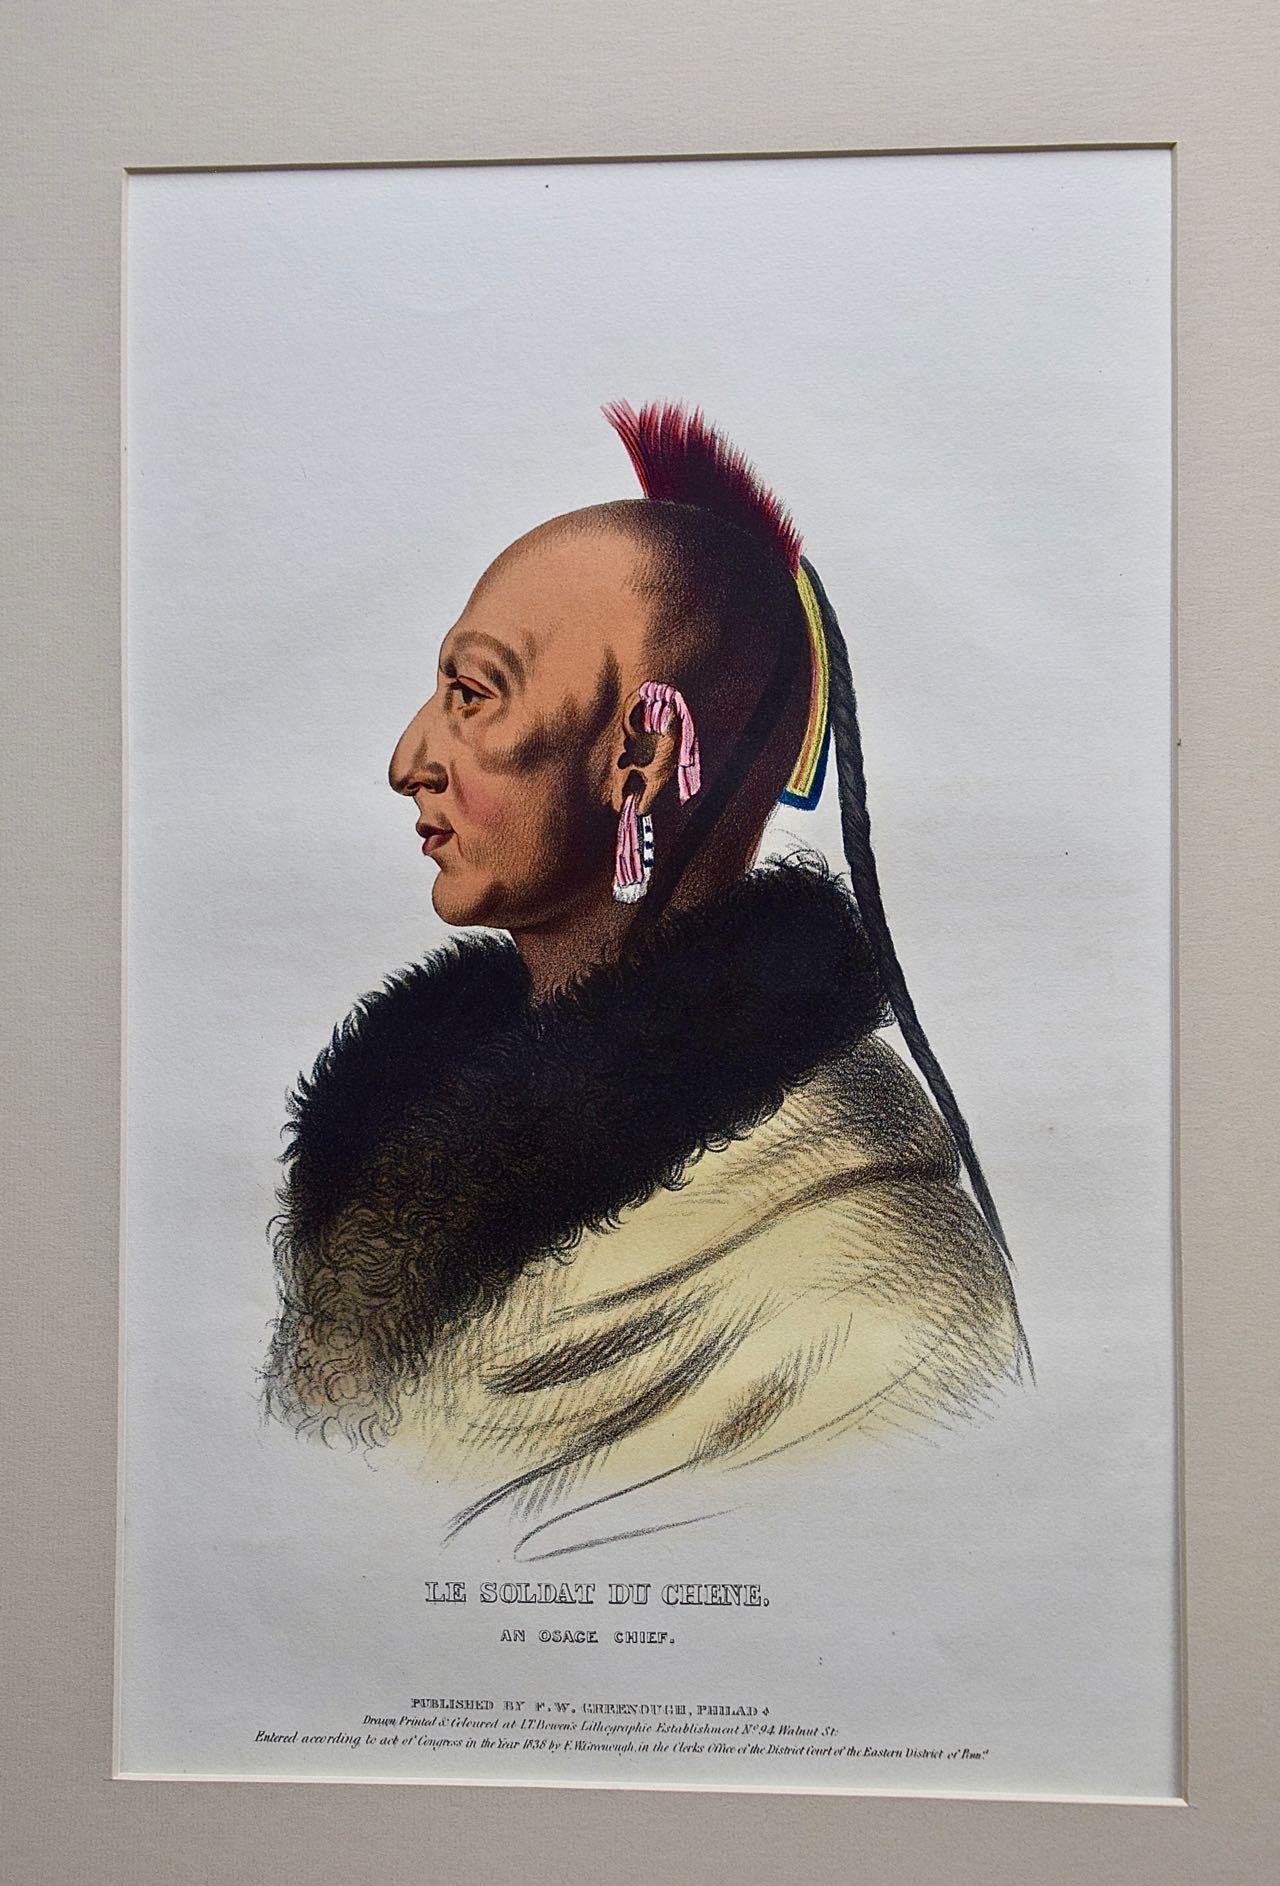 Le Soldat Du Chene, Osage Chief: Hand Colored McKenney Folio-sized Lithograph